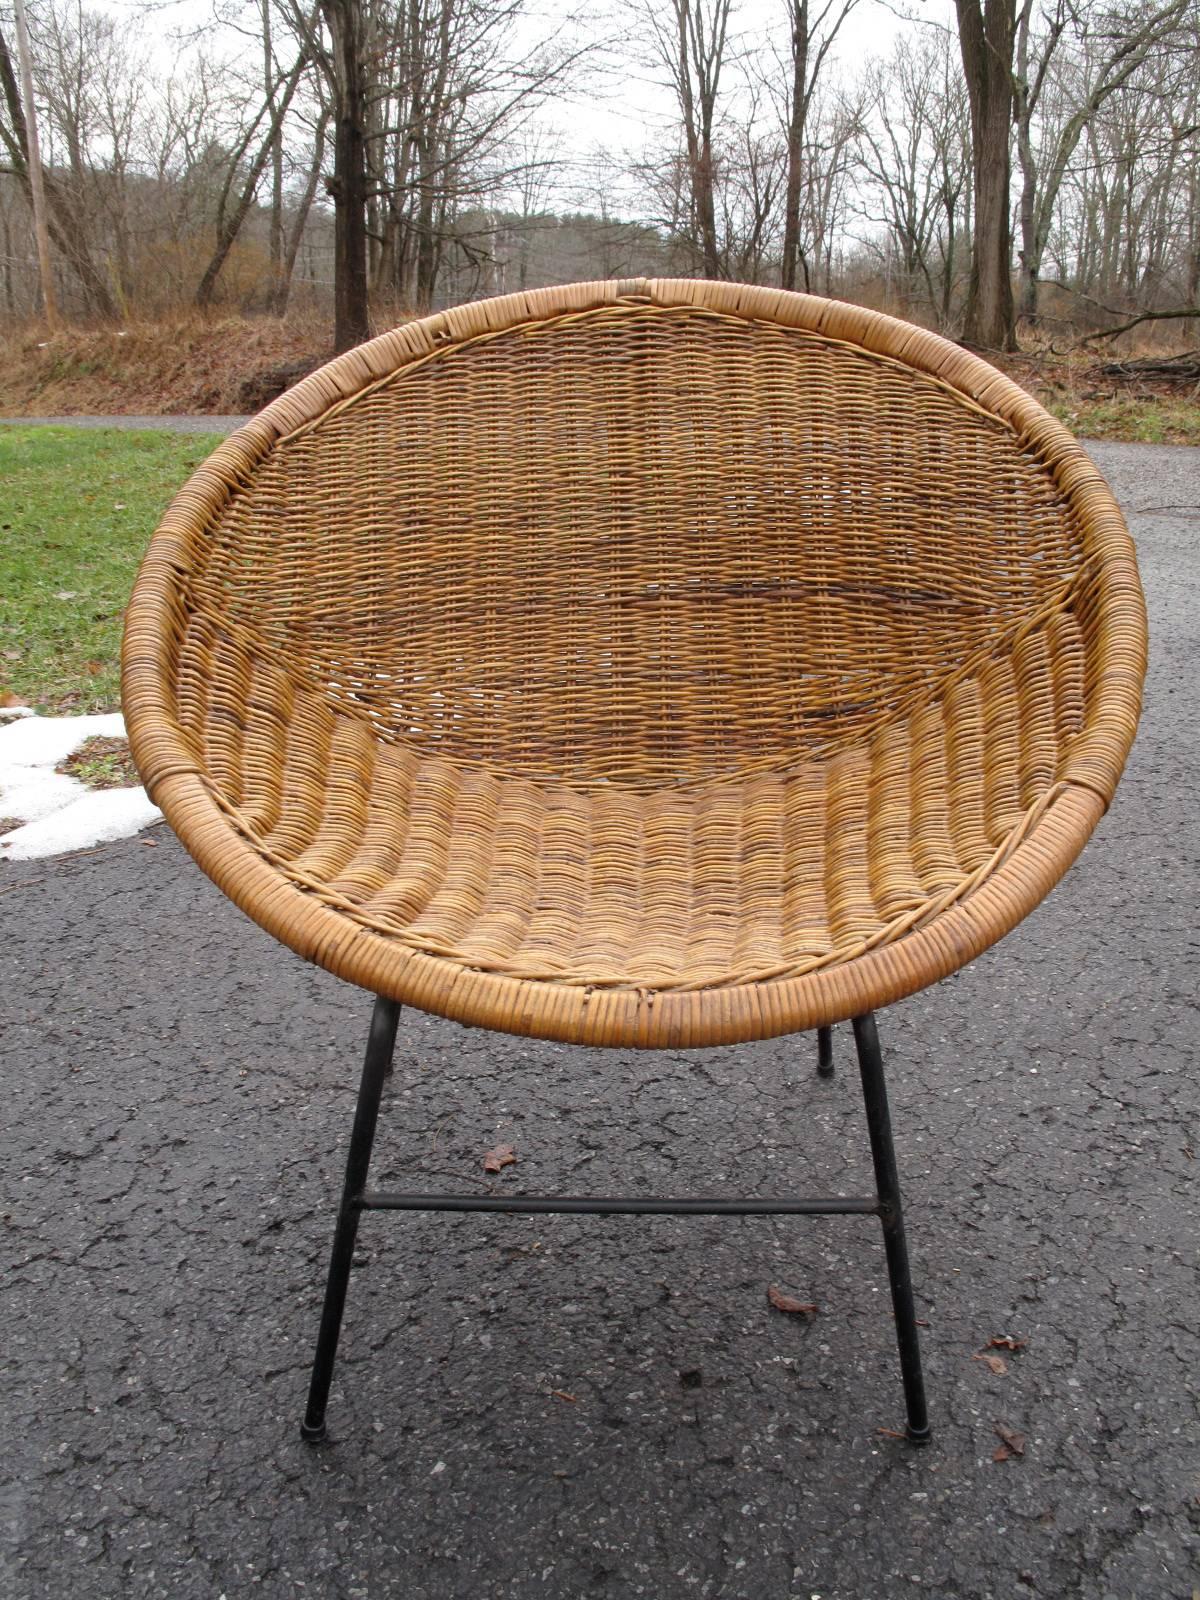 1960s woven rattan chair. Steel base, painted black.
  